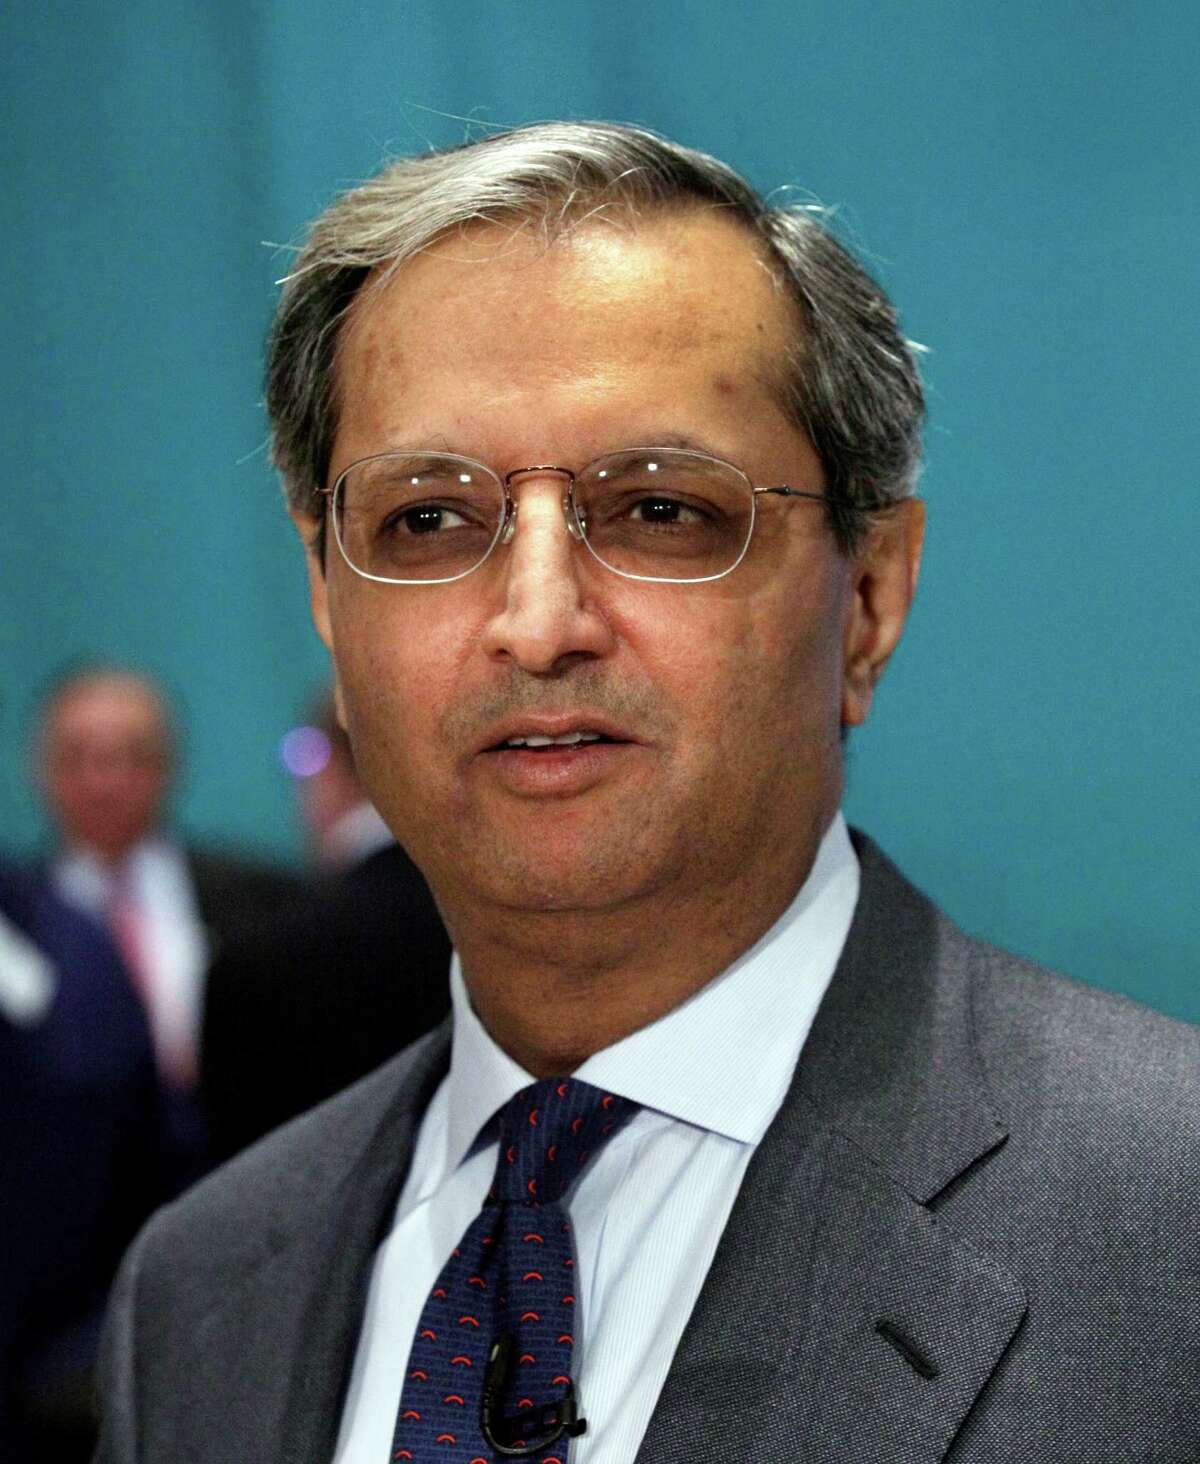 FILE - In a Monday, June 18, 2012 file photo, Citigroup CEO Vikram Pandit prepares for a television interview on the floor of the New York Stock Exchange, after he rang the opening bell. Twenty-six big U.S. companies paid their CEOs more last year than they paid the federal government in tax, according to a study released Thursday, Aug. 16, 2012 by the Institute for Policy Studies. The study said the companies, including AT&T, Boeing and Citigroup, paid their CEOs an average of $20.4 million last year while paying little or no federal tax on ample profits, according to regulatory filings. The study also laid into Citigroup for paying Pandit $14.9 million while the bank received a net $144 million in tax benefits. (AP Photo/Richard Drew, File)